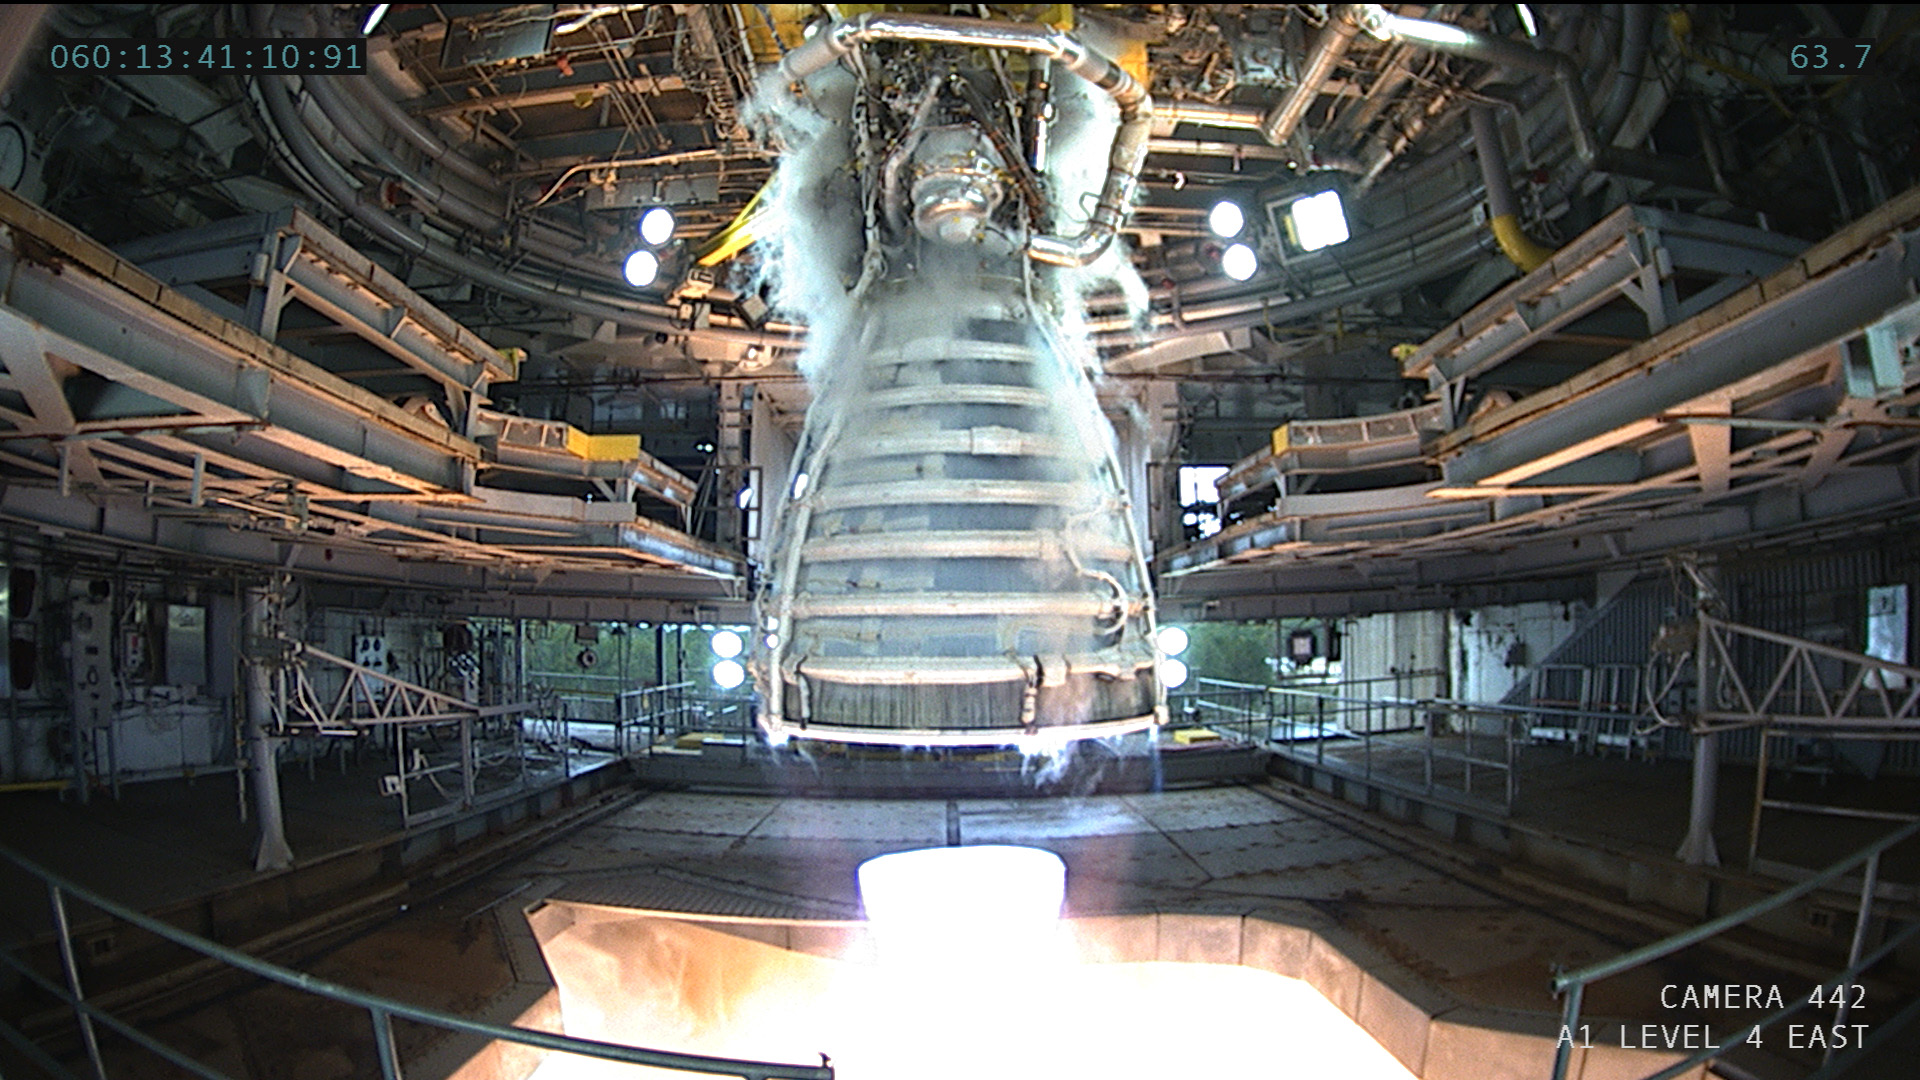 closeup of RS-25 engine during a hot fire